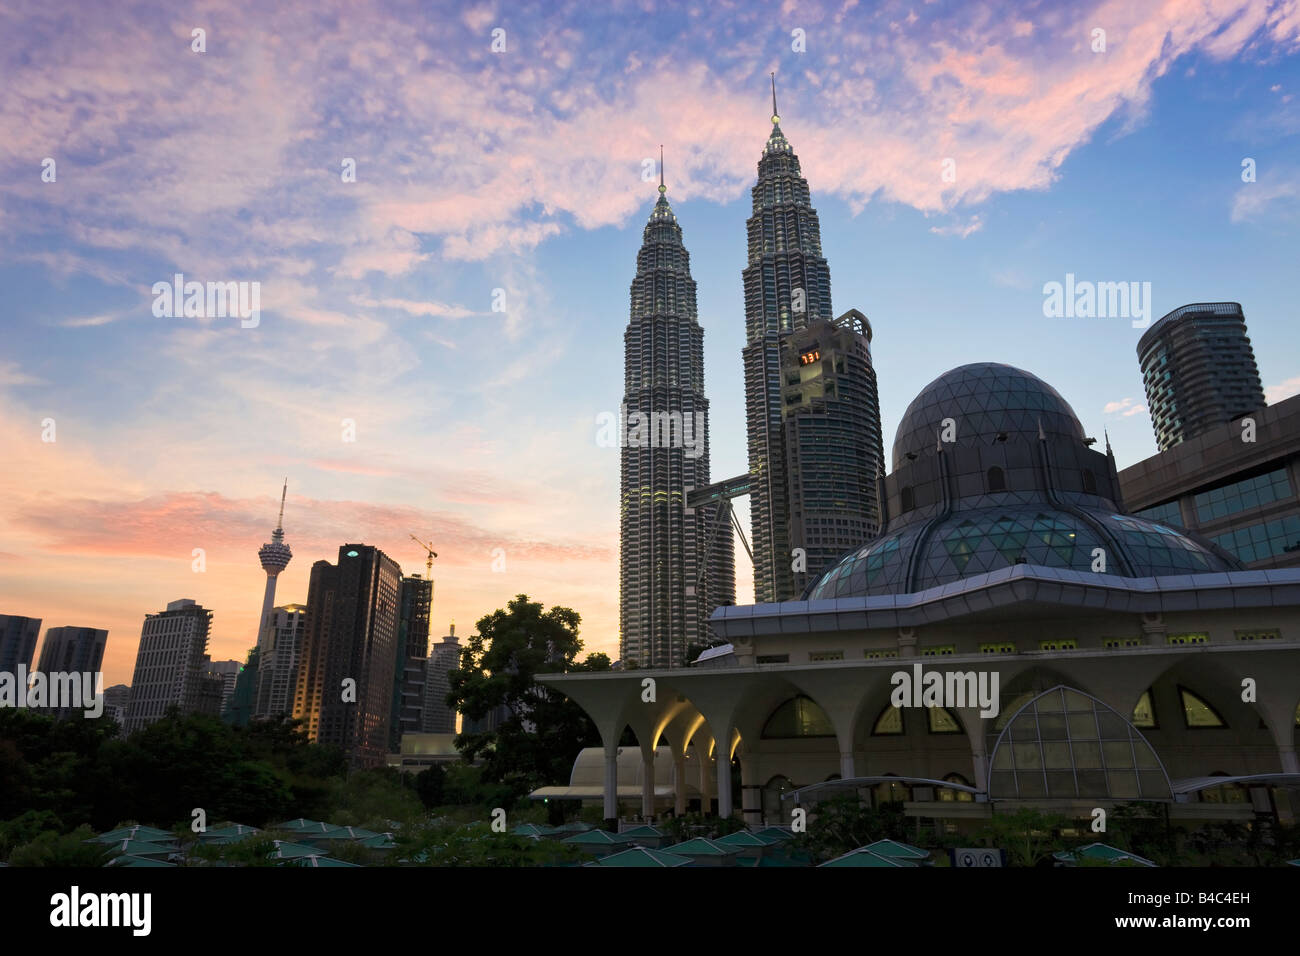 Asia, Malaysia, Selangor State, Kuala Lumpur, Mosque in the KLCC city park grounds at the base of the iconic Petronas Towers Stock Photo